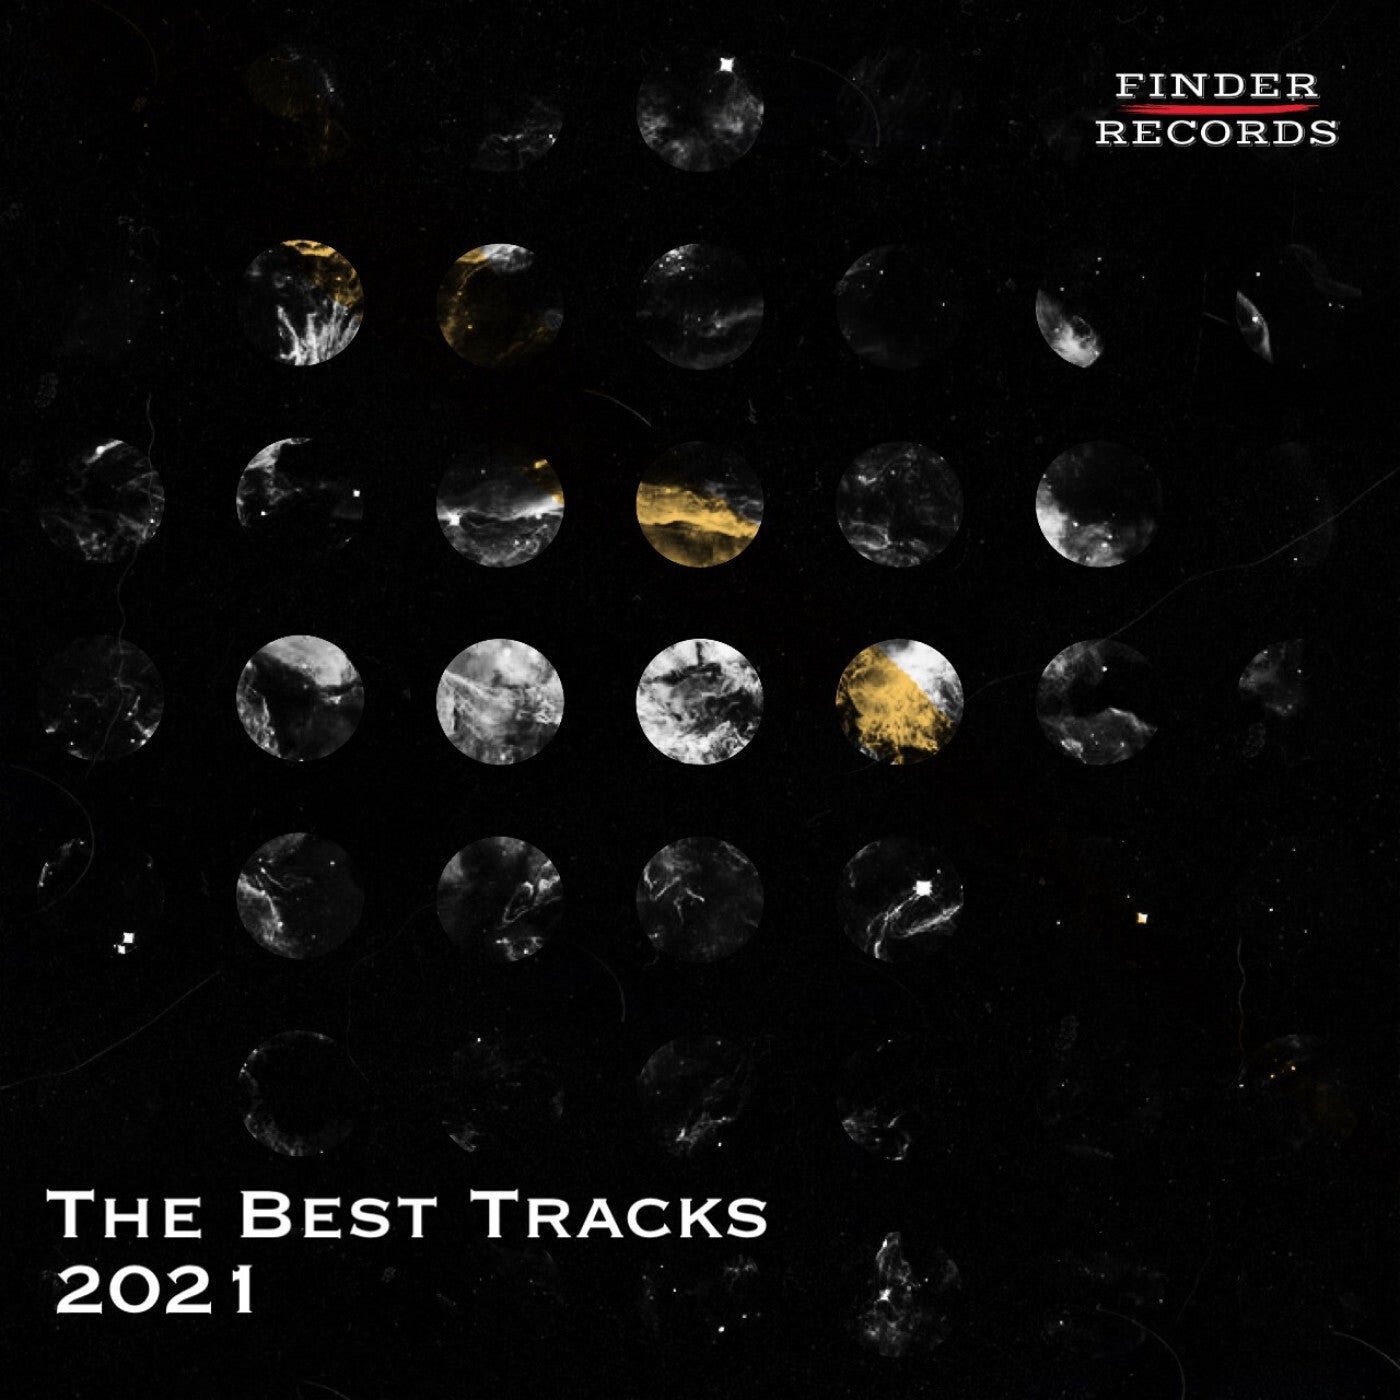 The Best Tracks 2021